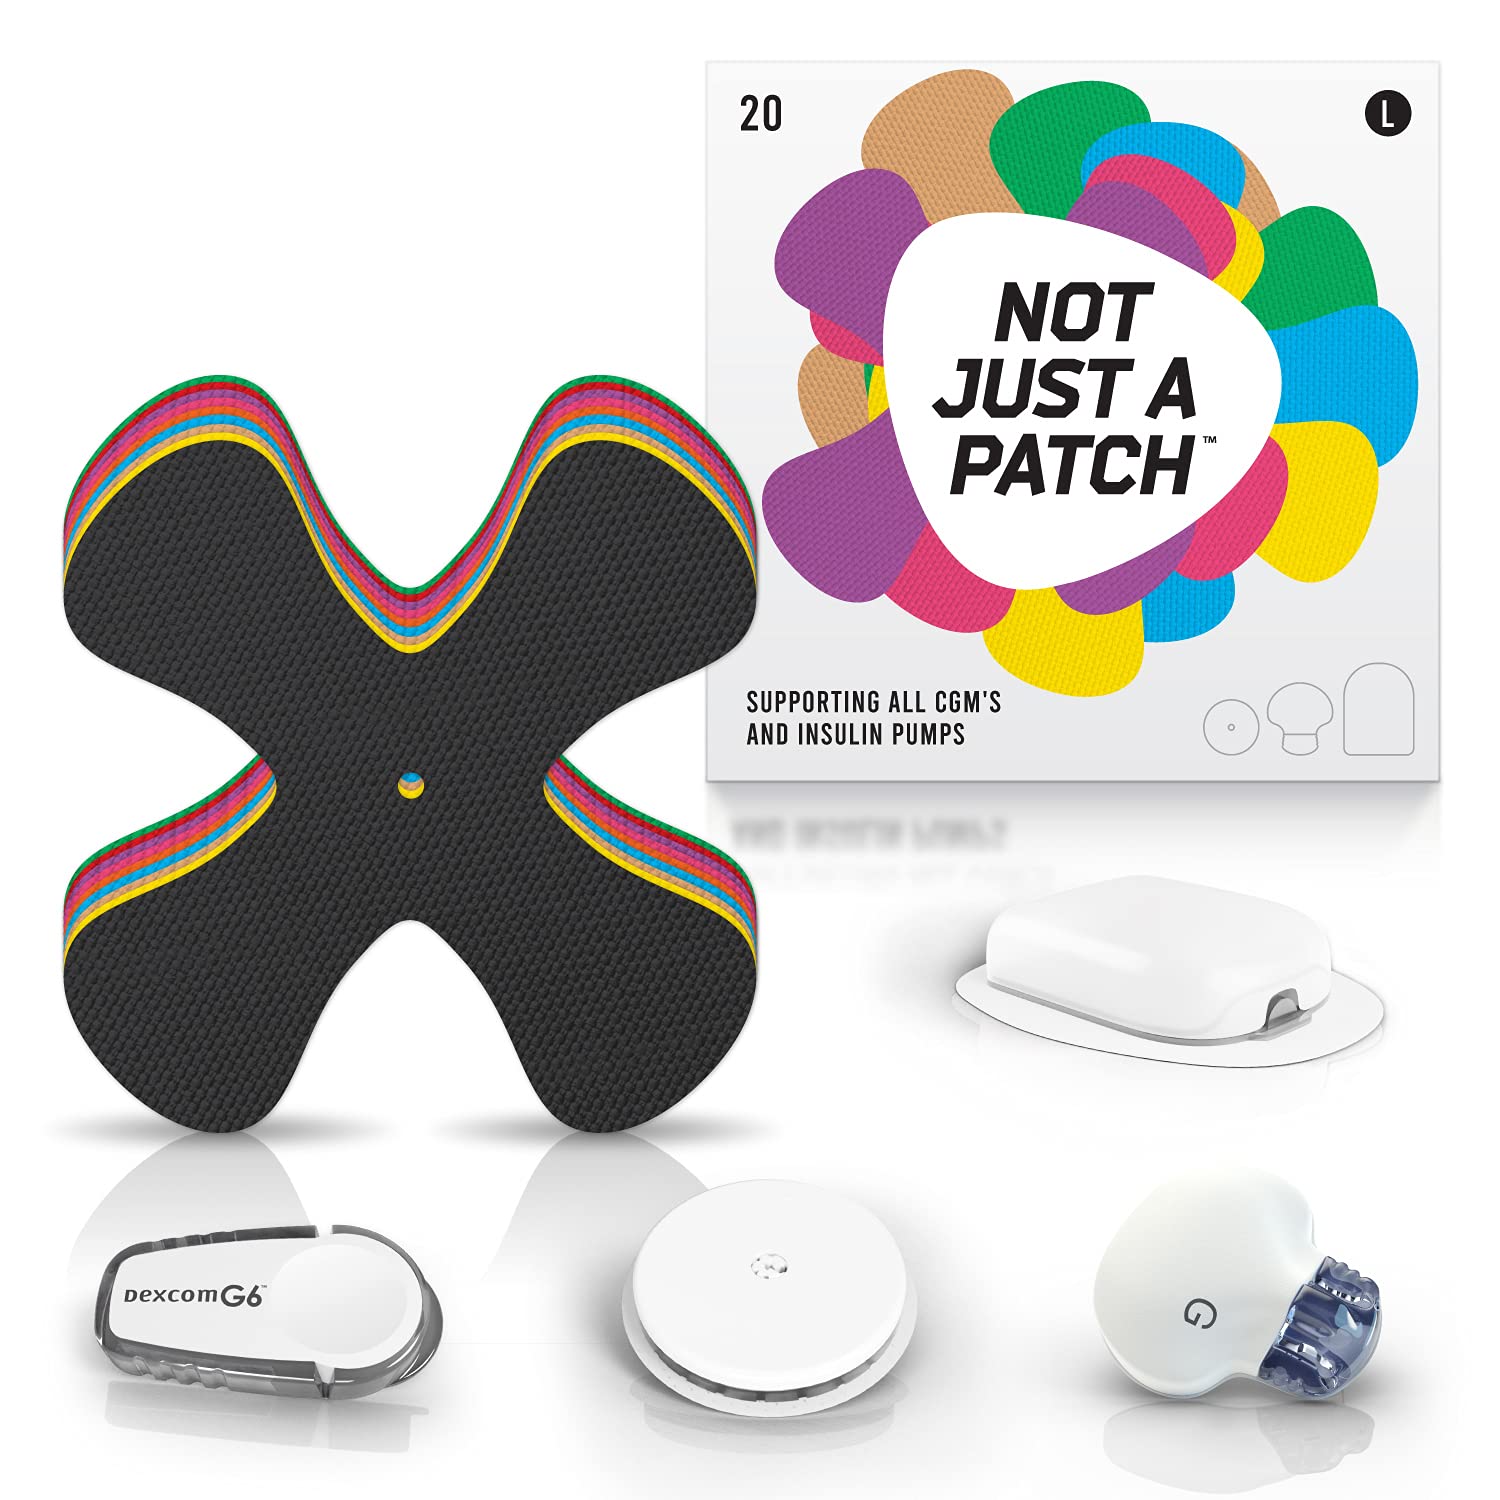 Not Just A Patch X-Patch CGM Sensor Patches (20 Pack) - Water Resistant  Omnipod 5 Adhesive Patches - Durable for Active Lifestyle for 10-14 Days 